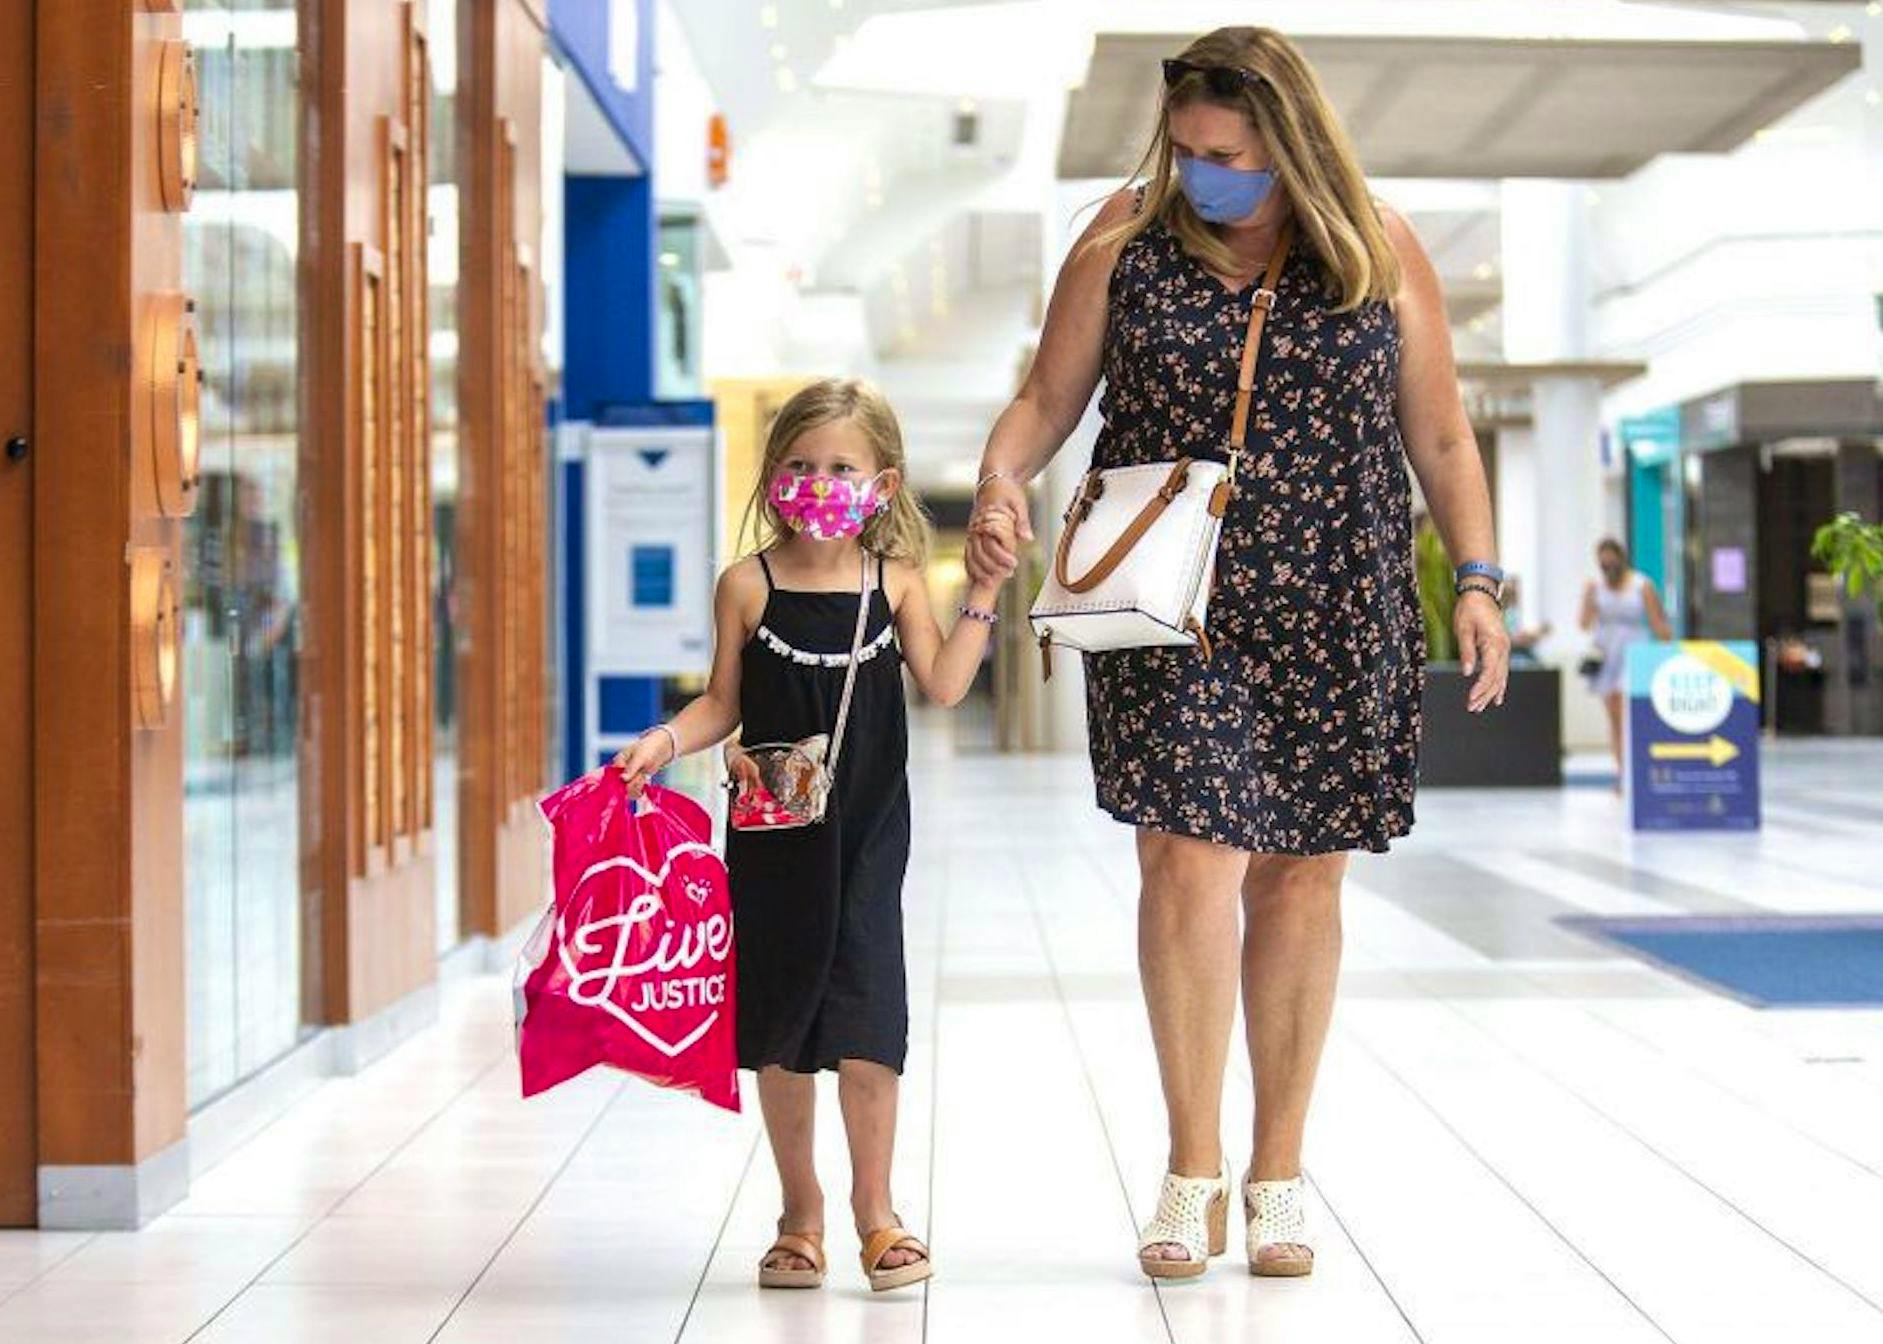 In this file photo from earlier this month, a woman and her daughter wear facemasks as they stroll through in a London, Ont., shopping mall. Beginning next Monday, Newfoundland and Labrador will join many other jurisdictions across Canada in making non-medical facemasks mandatory in public spaces.